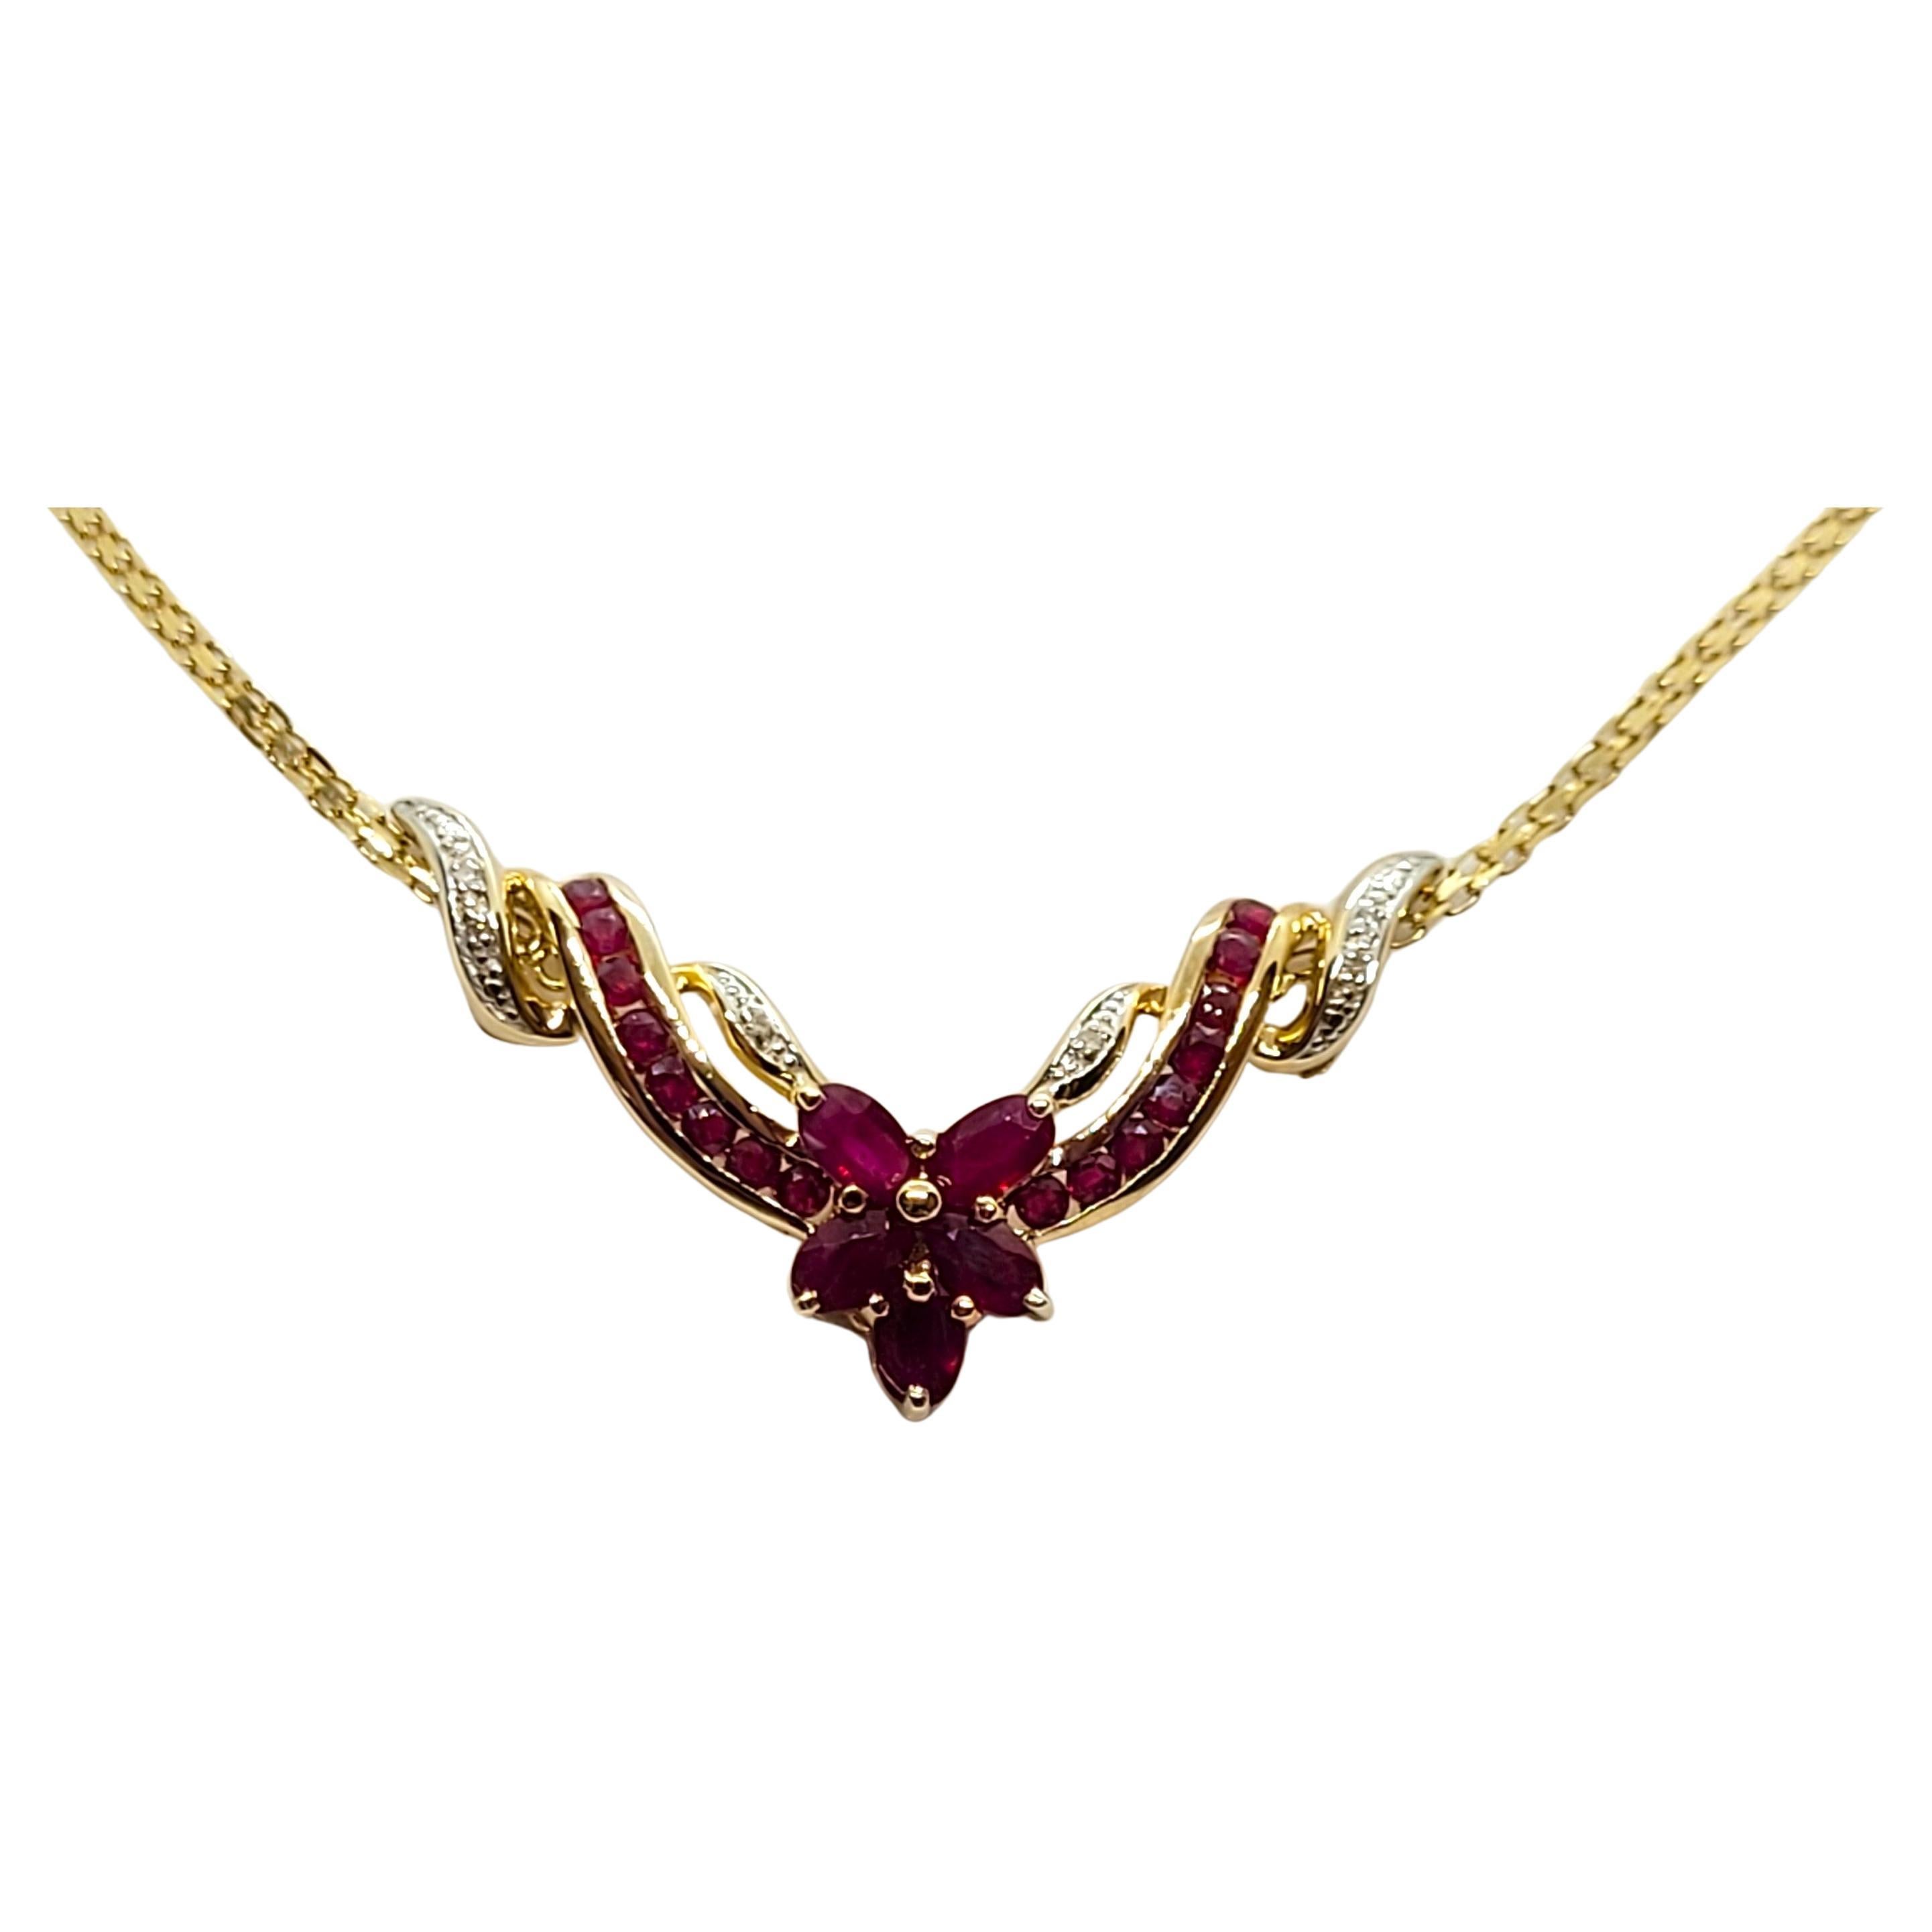 10kt Yellow Gold Ruby Diamond Necklace 17.5 In, 1.75cttw Rubies, .05cttw Diamond For Sale